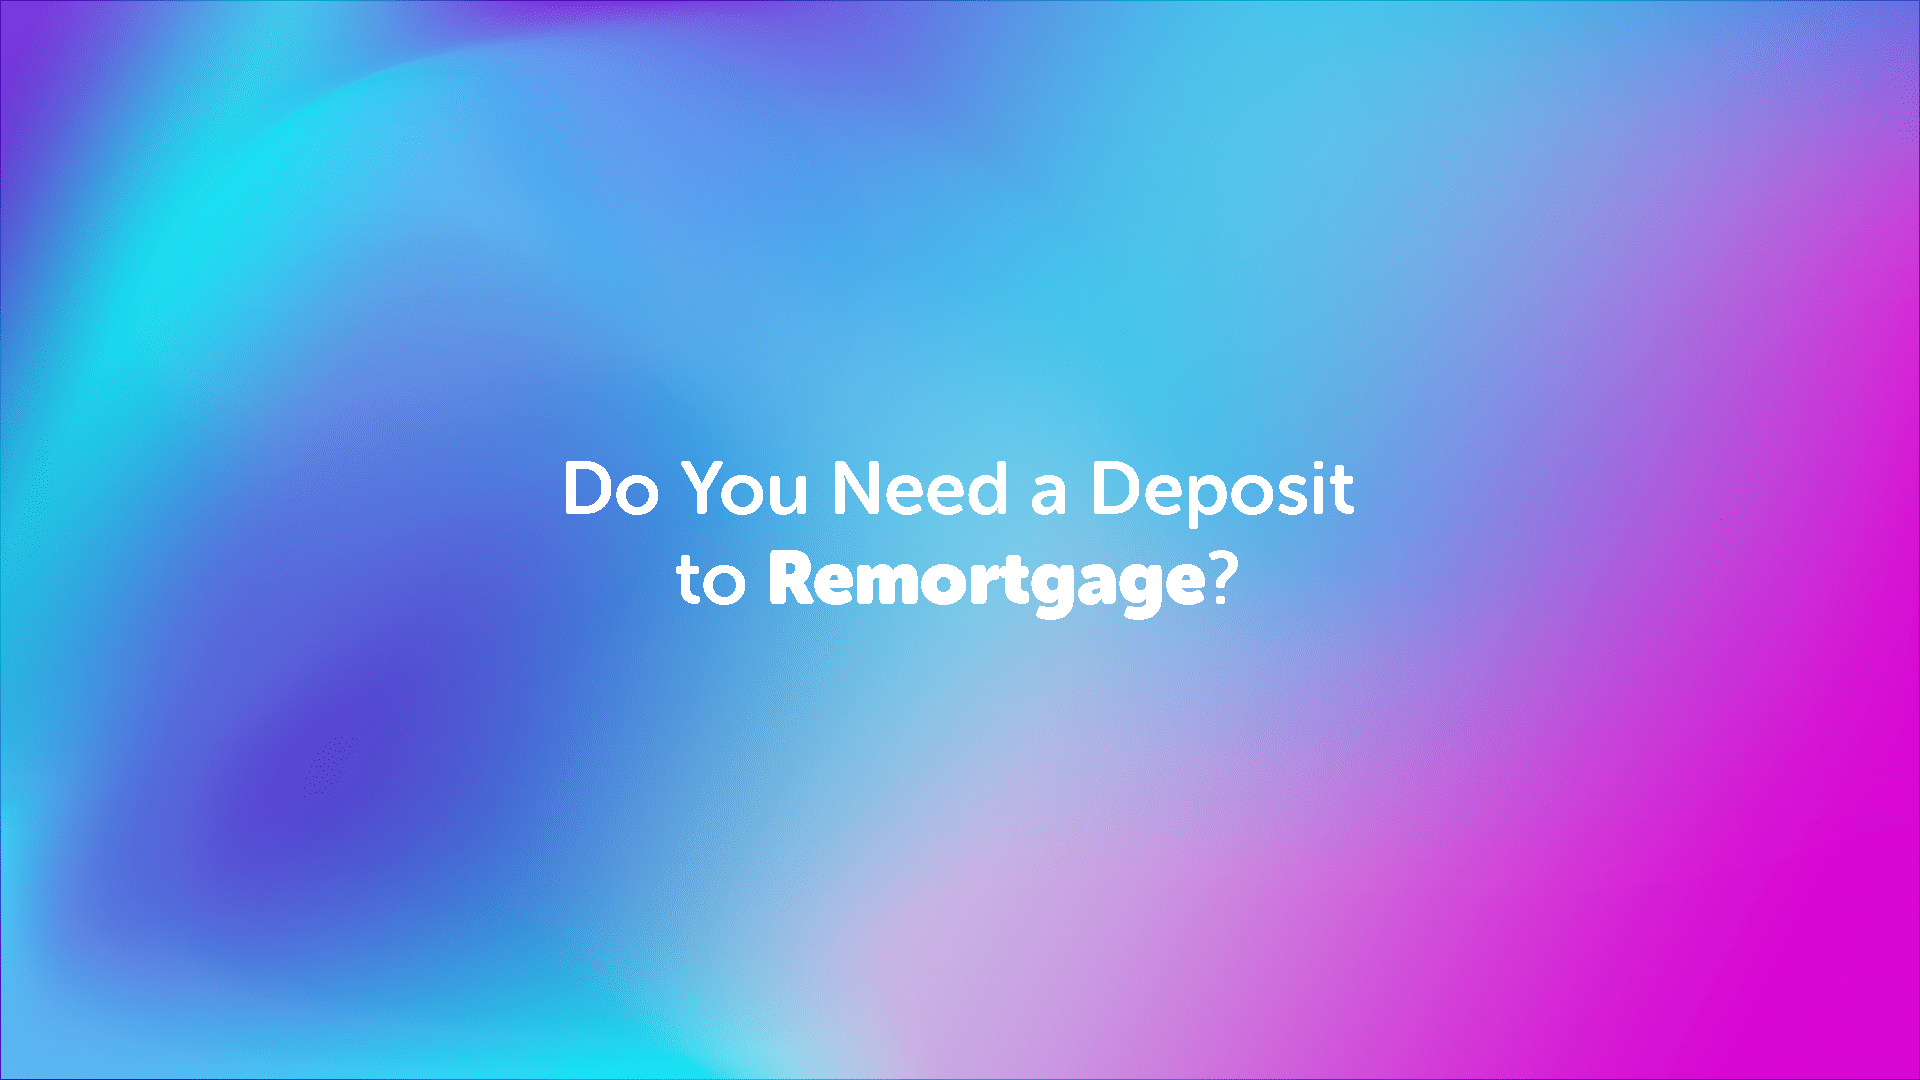 Do You Need a Deposit to Remortgage in Manchester?